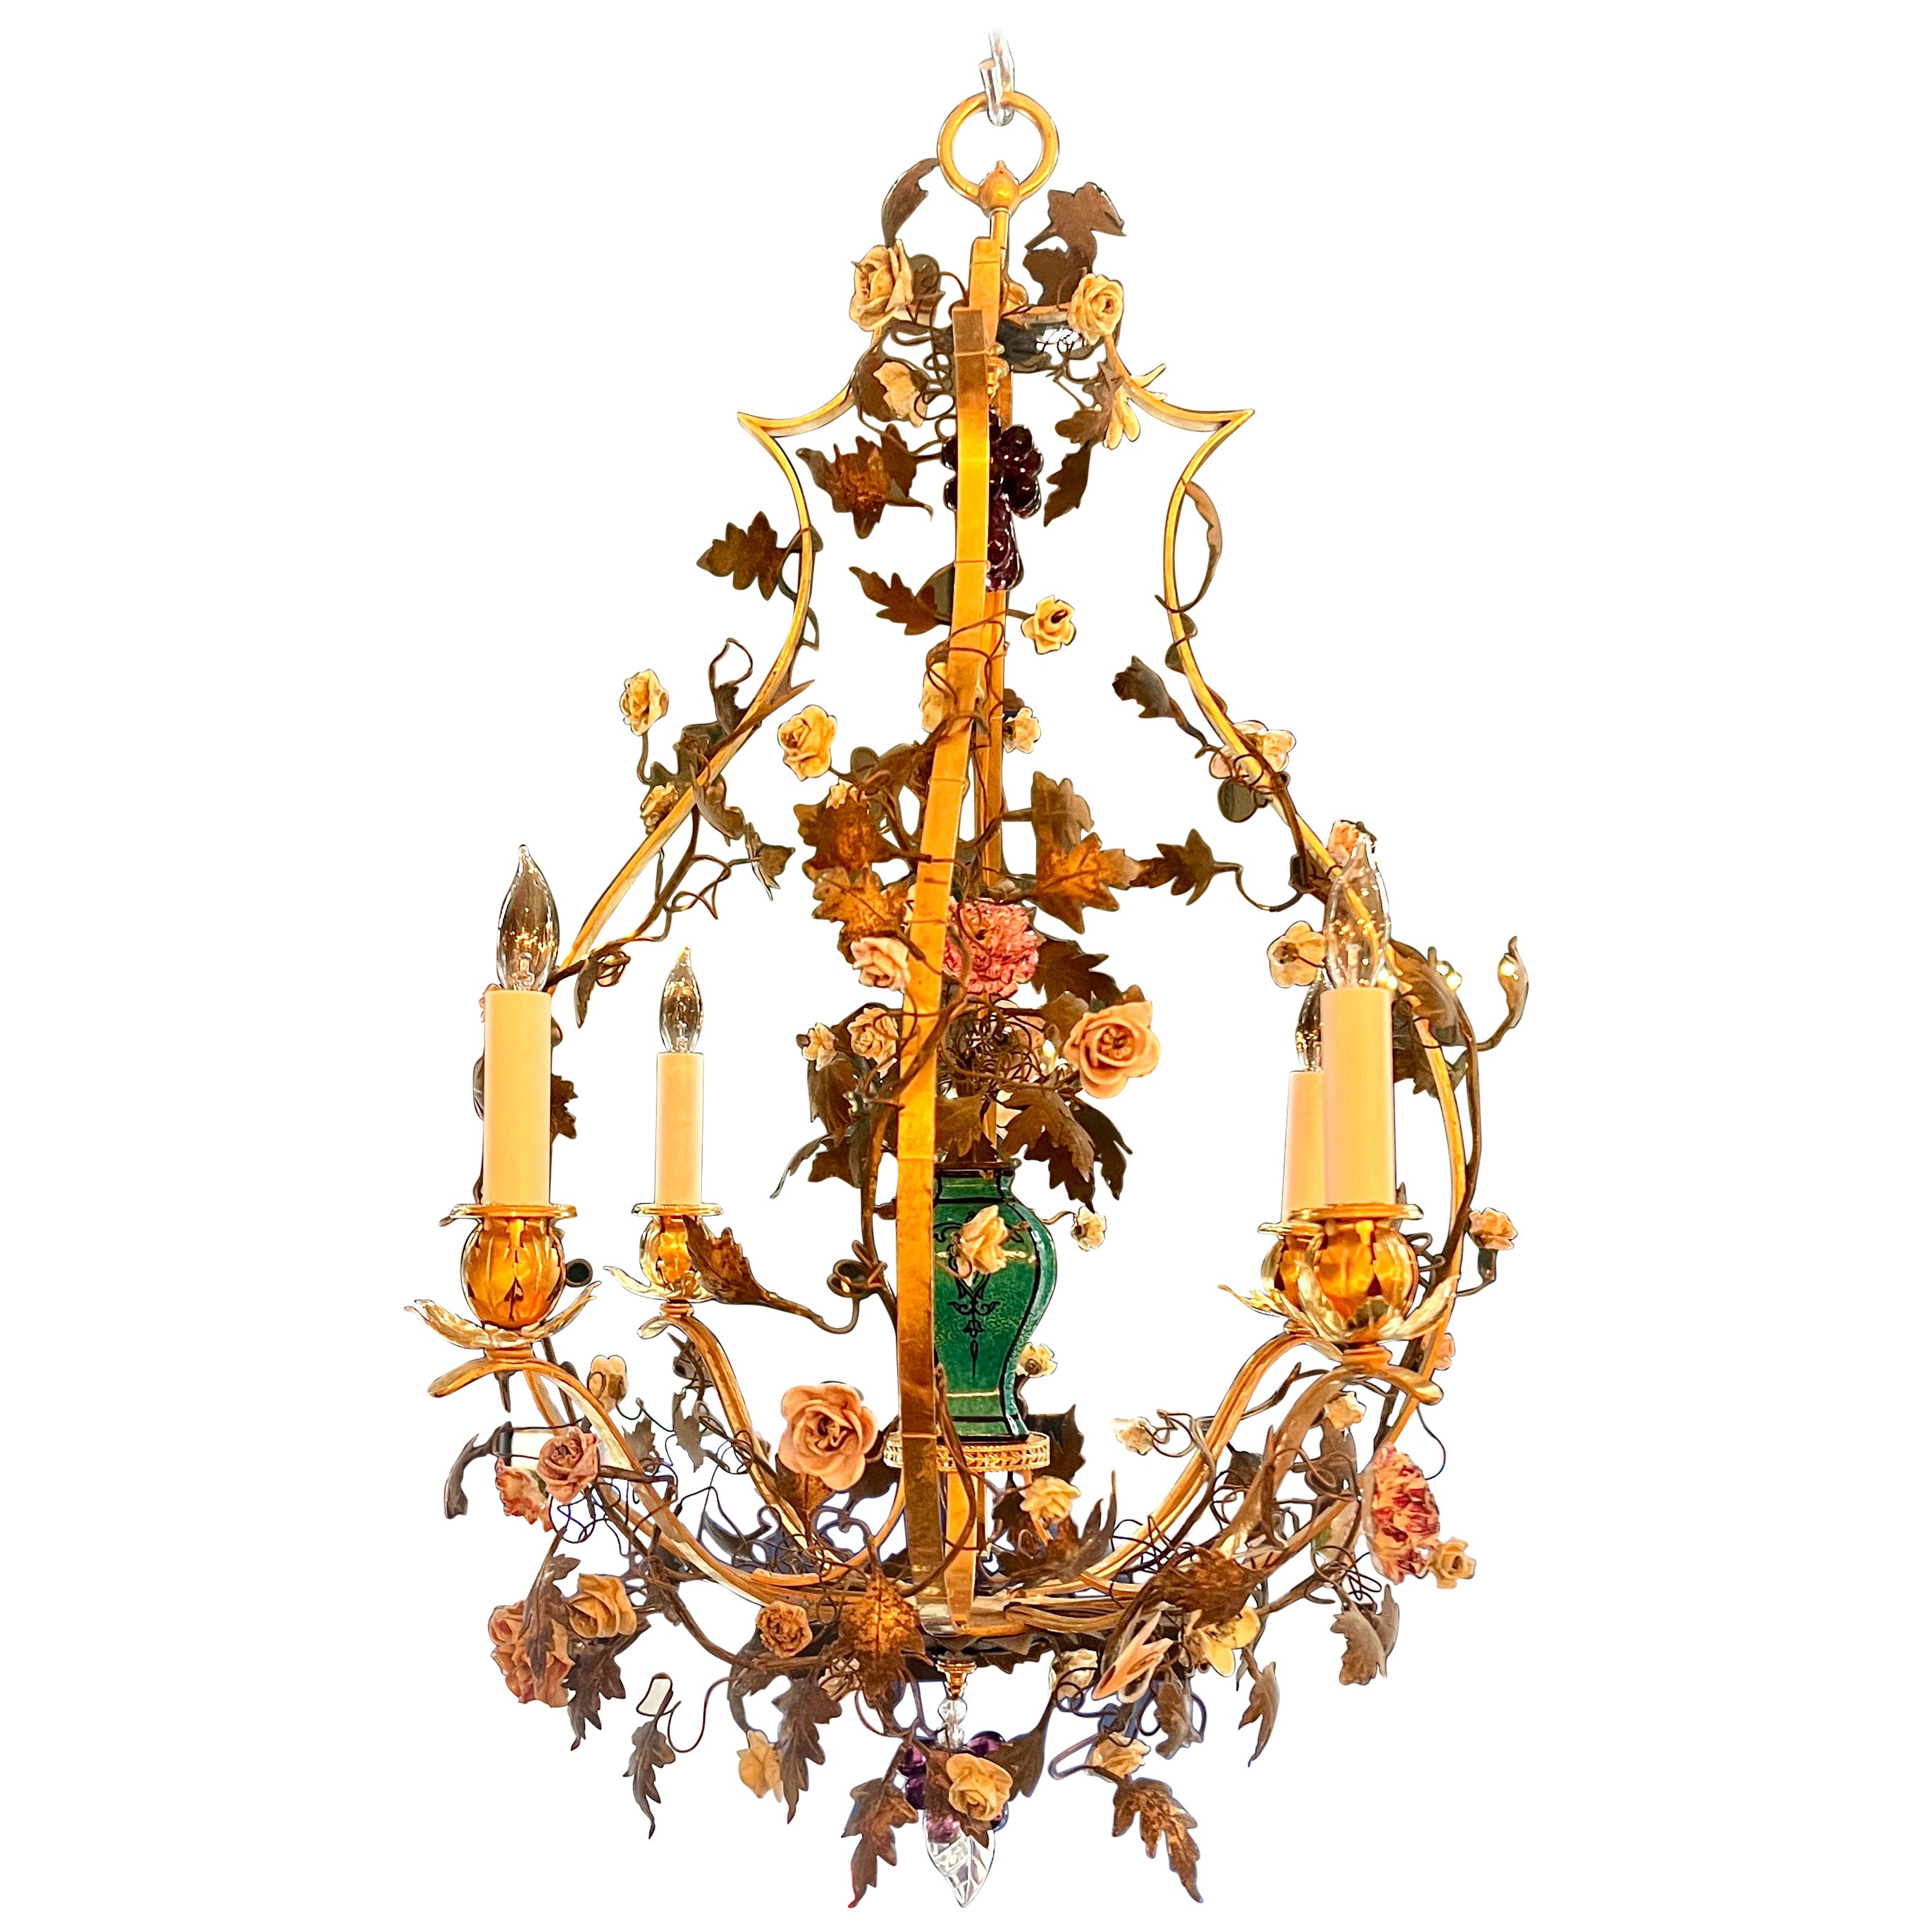 Antique 19th Century French Tole and "Saxe" Porcelain Flowers Chandelier.